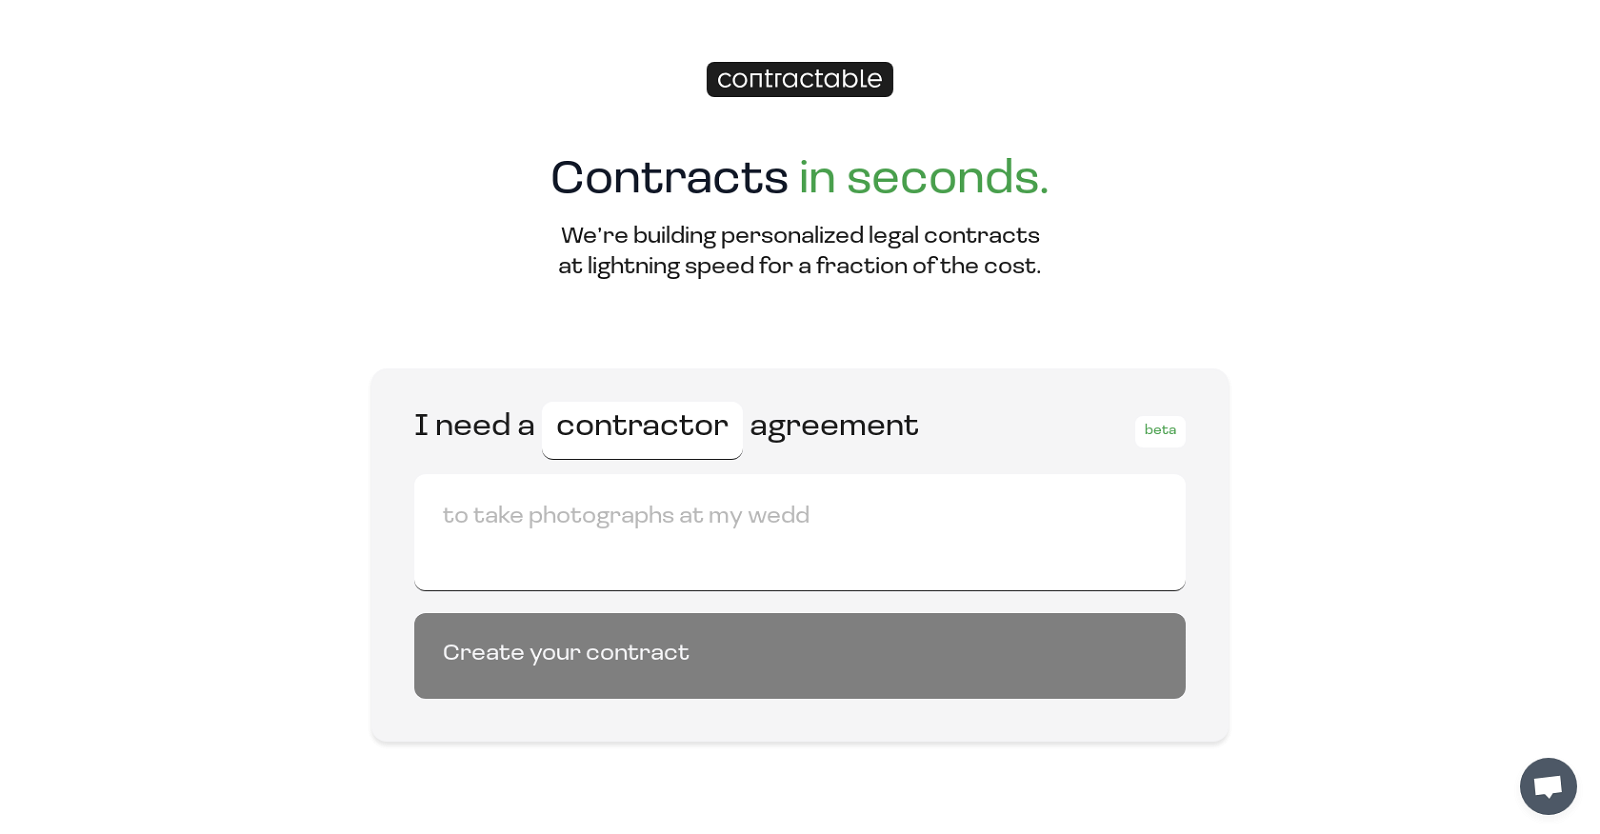 Contractable